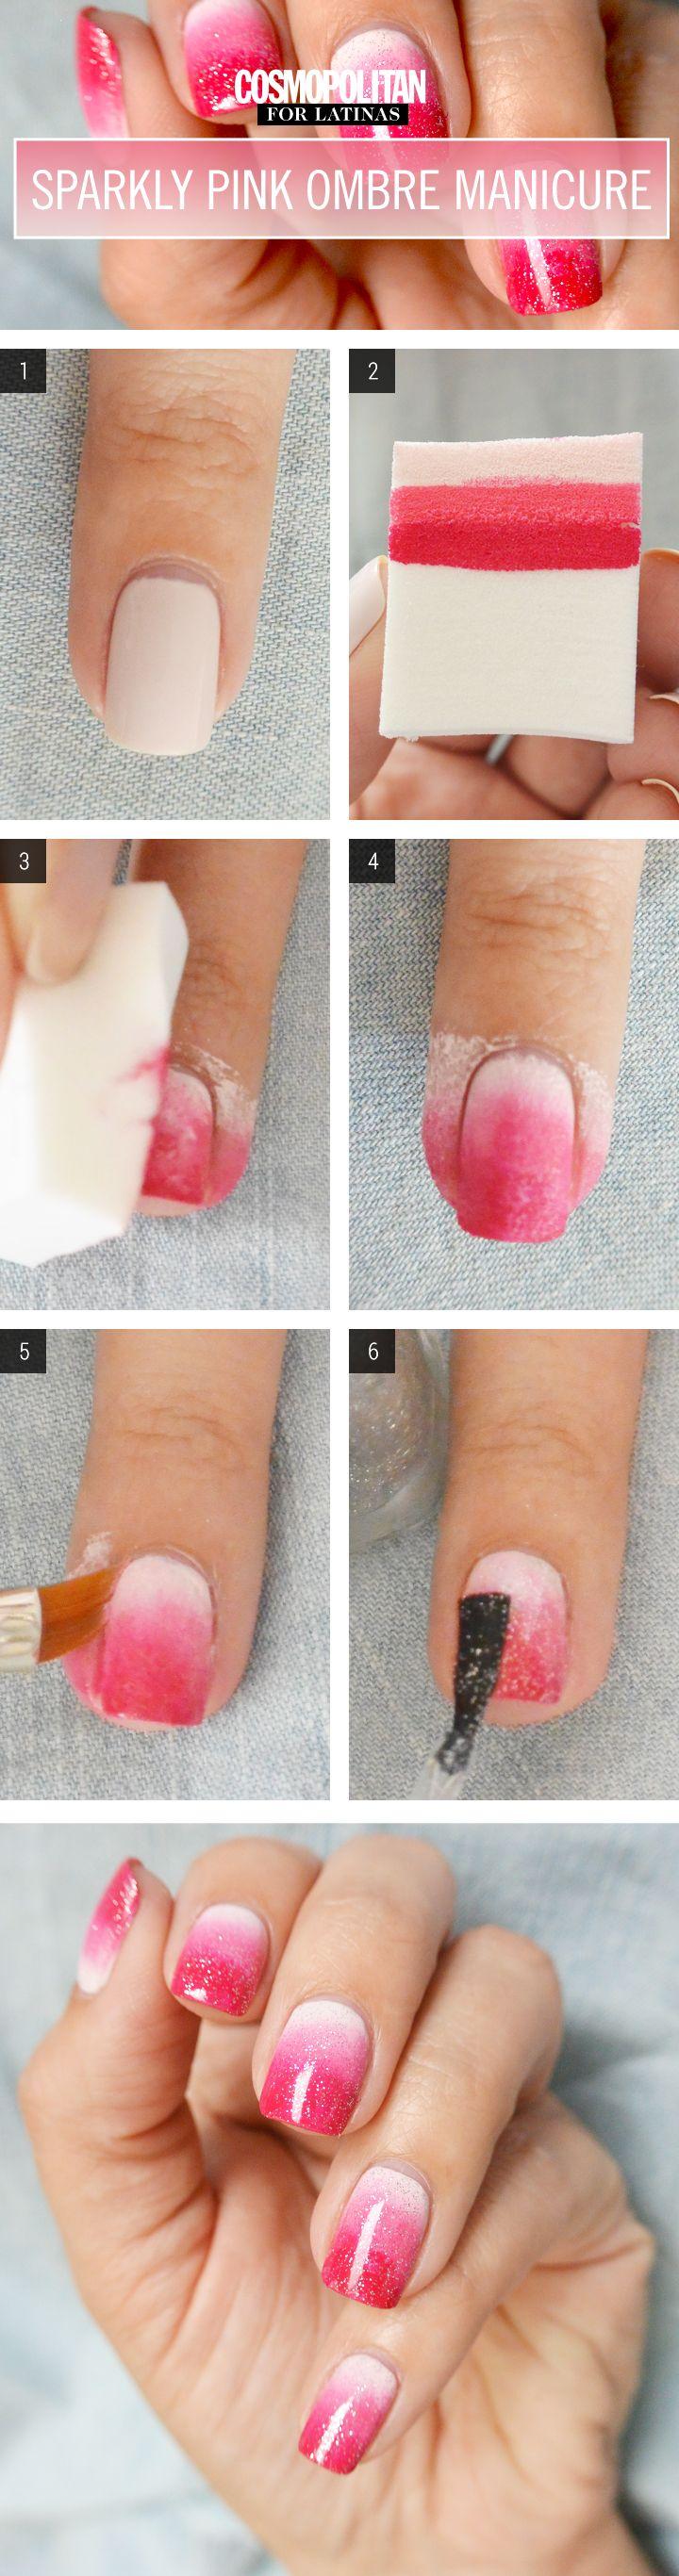 Mariage - Nail Art How-To: Sparkly Pink Ombre Manicure